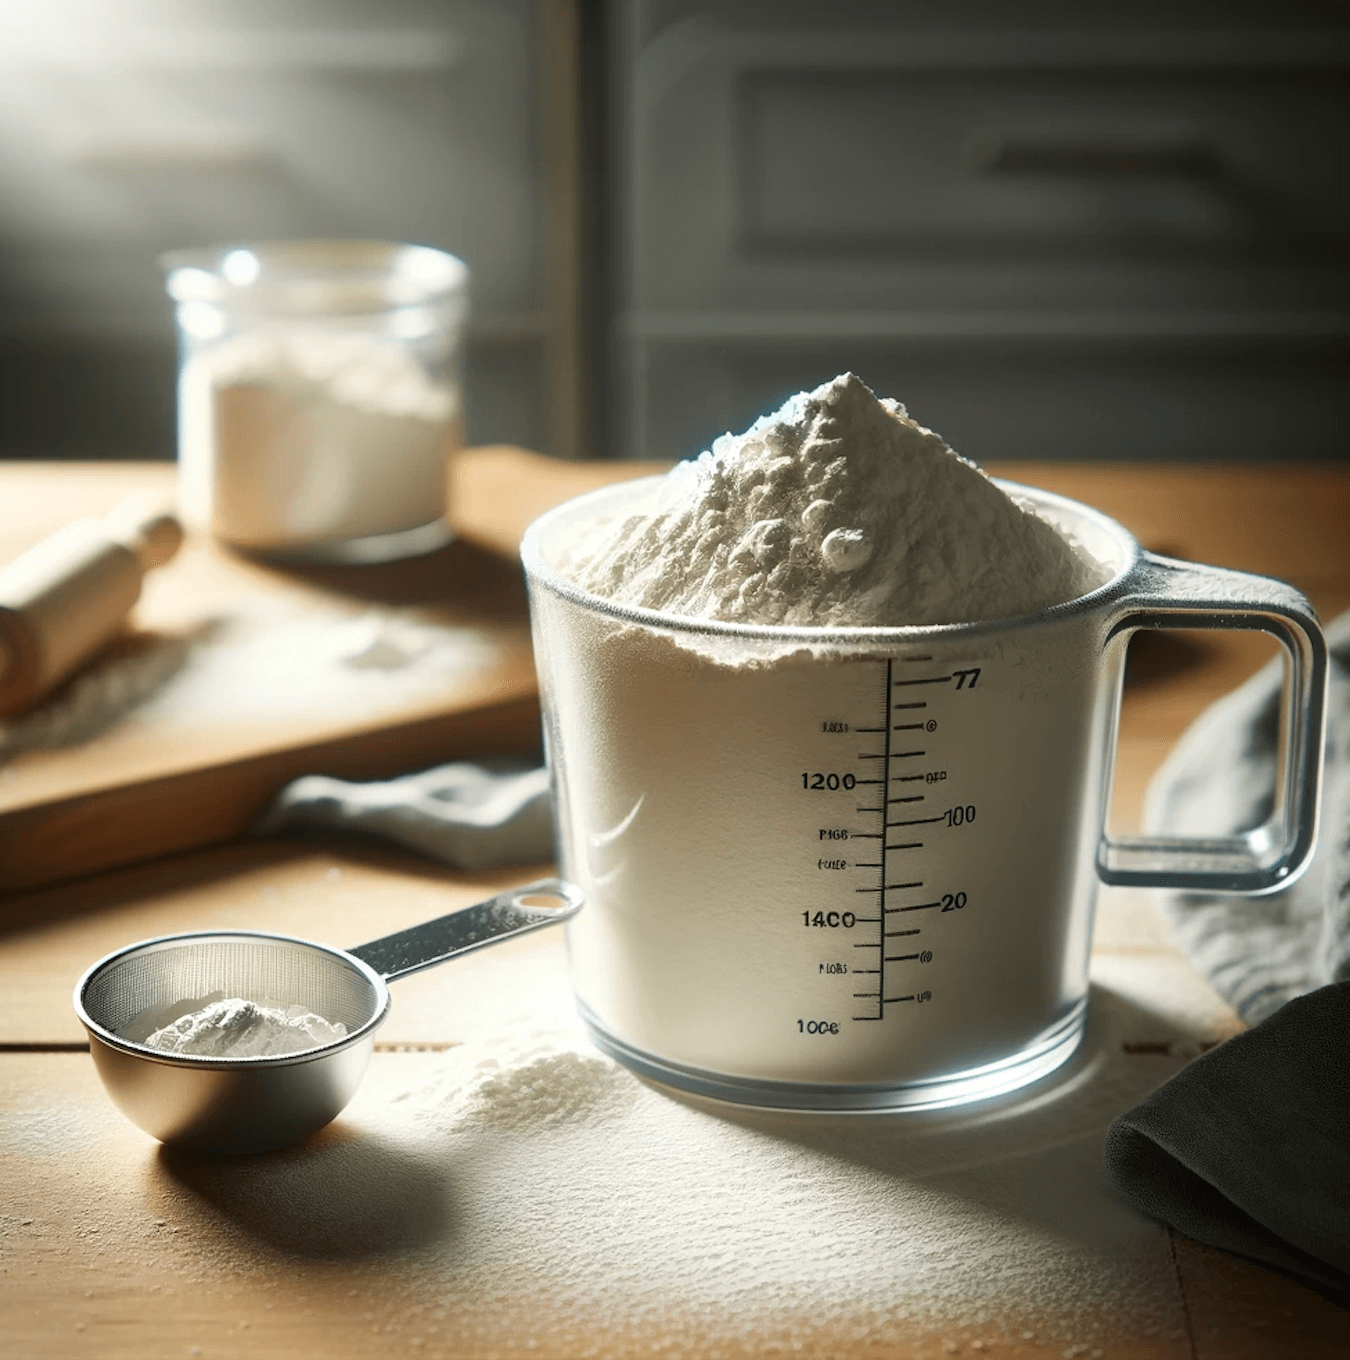 400 grams of flour in cups